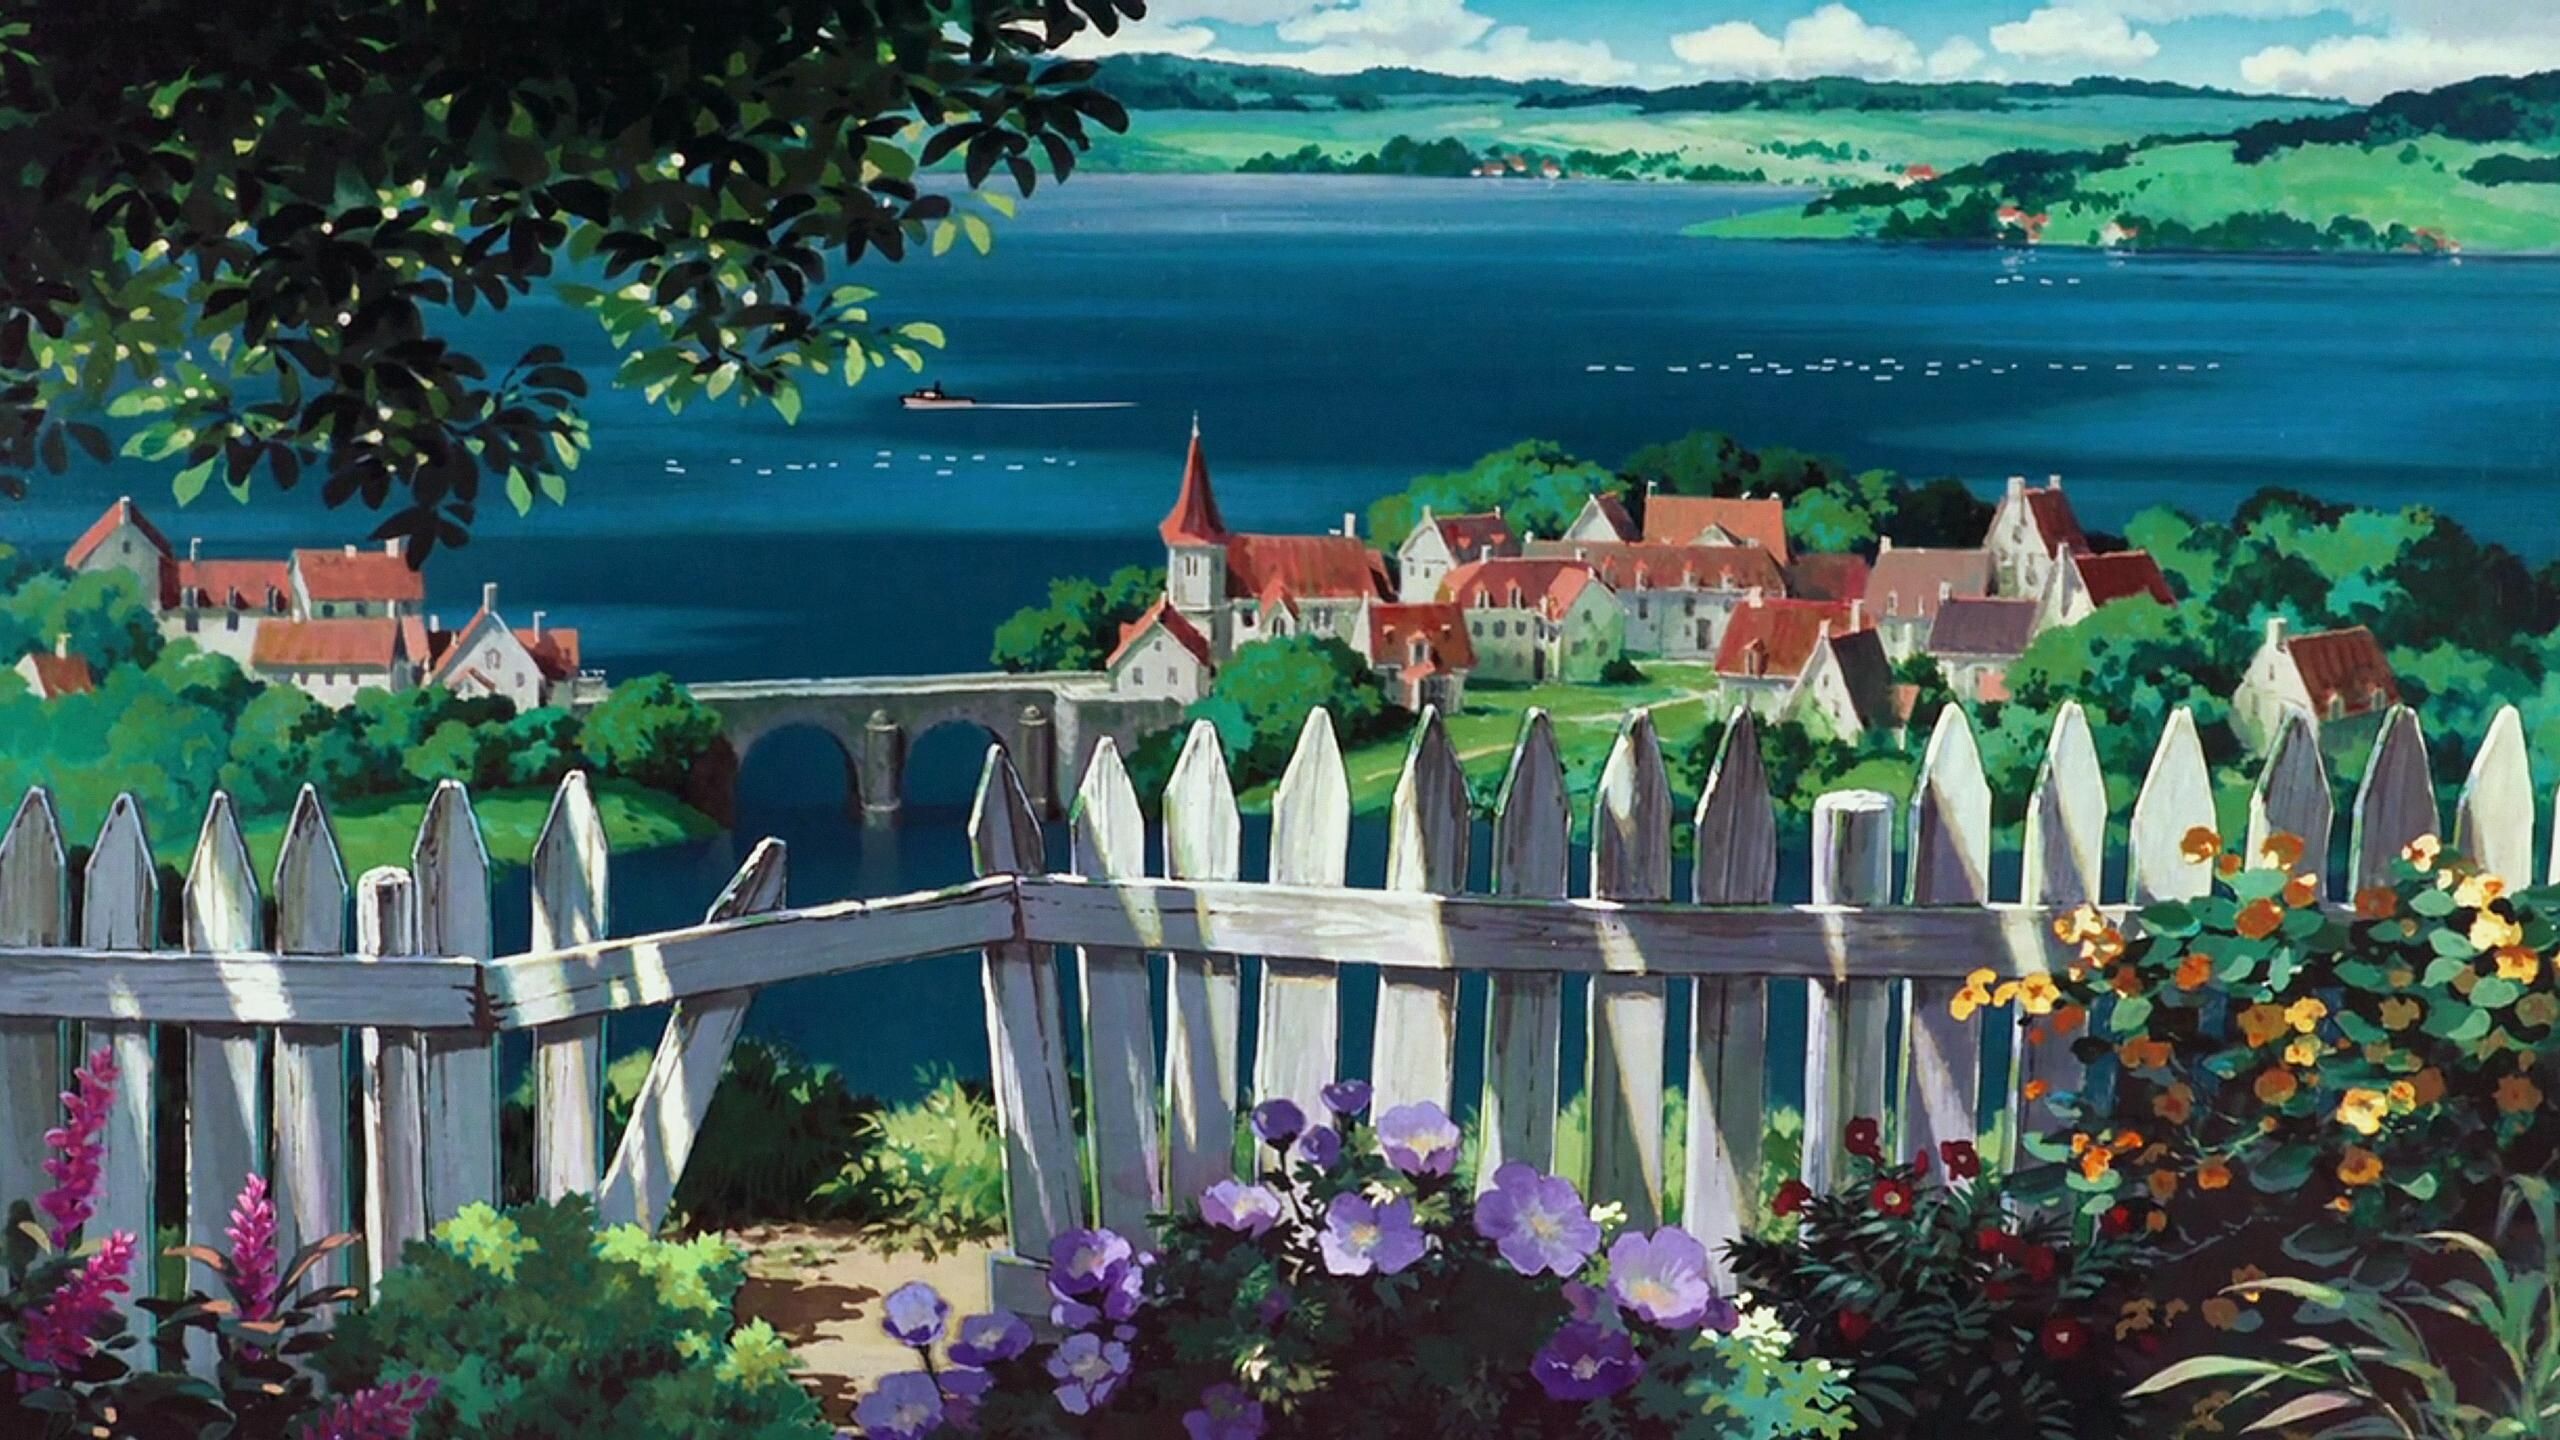 Studio Ghibli: Isao Takahata's films often dealt with adult themes, such as war and death. 2560x1440 HD Background.